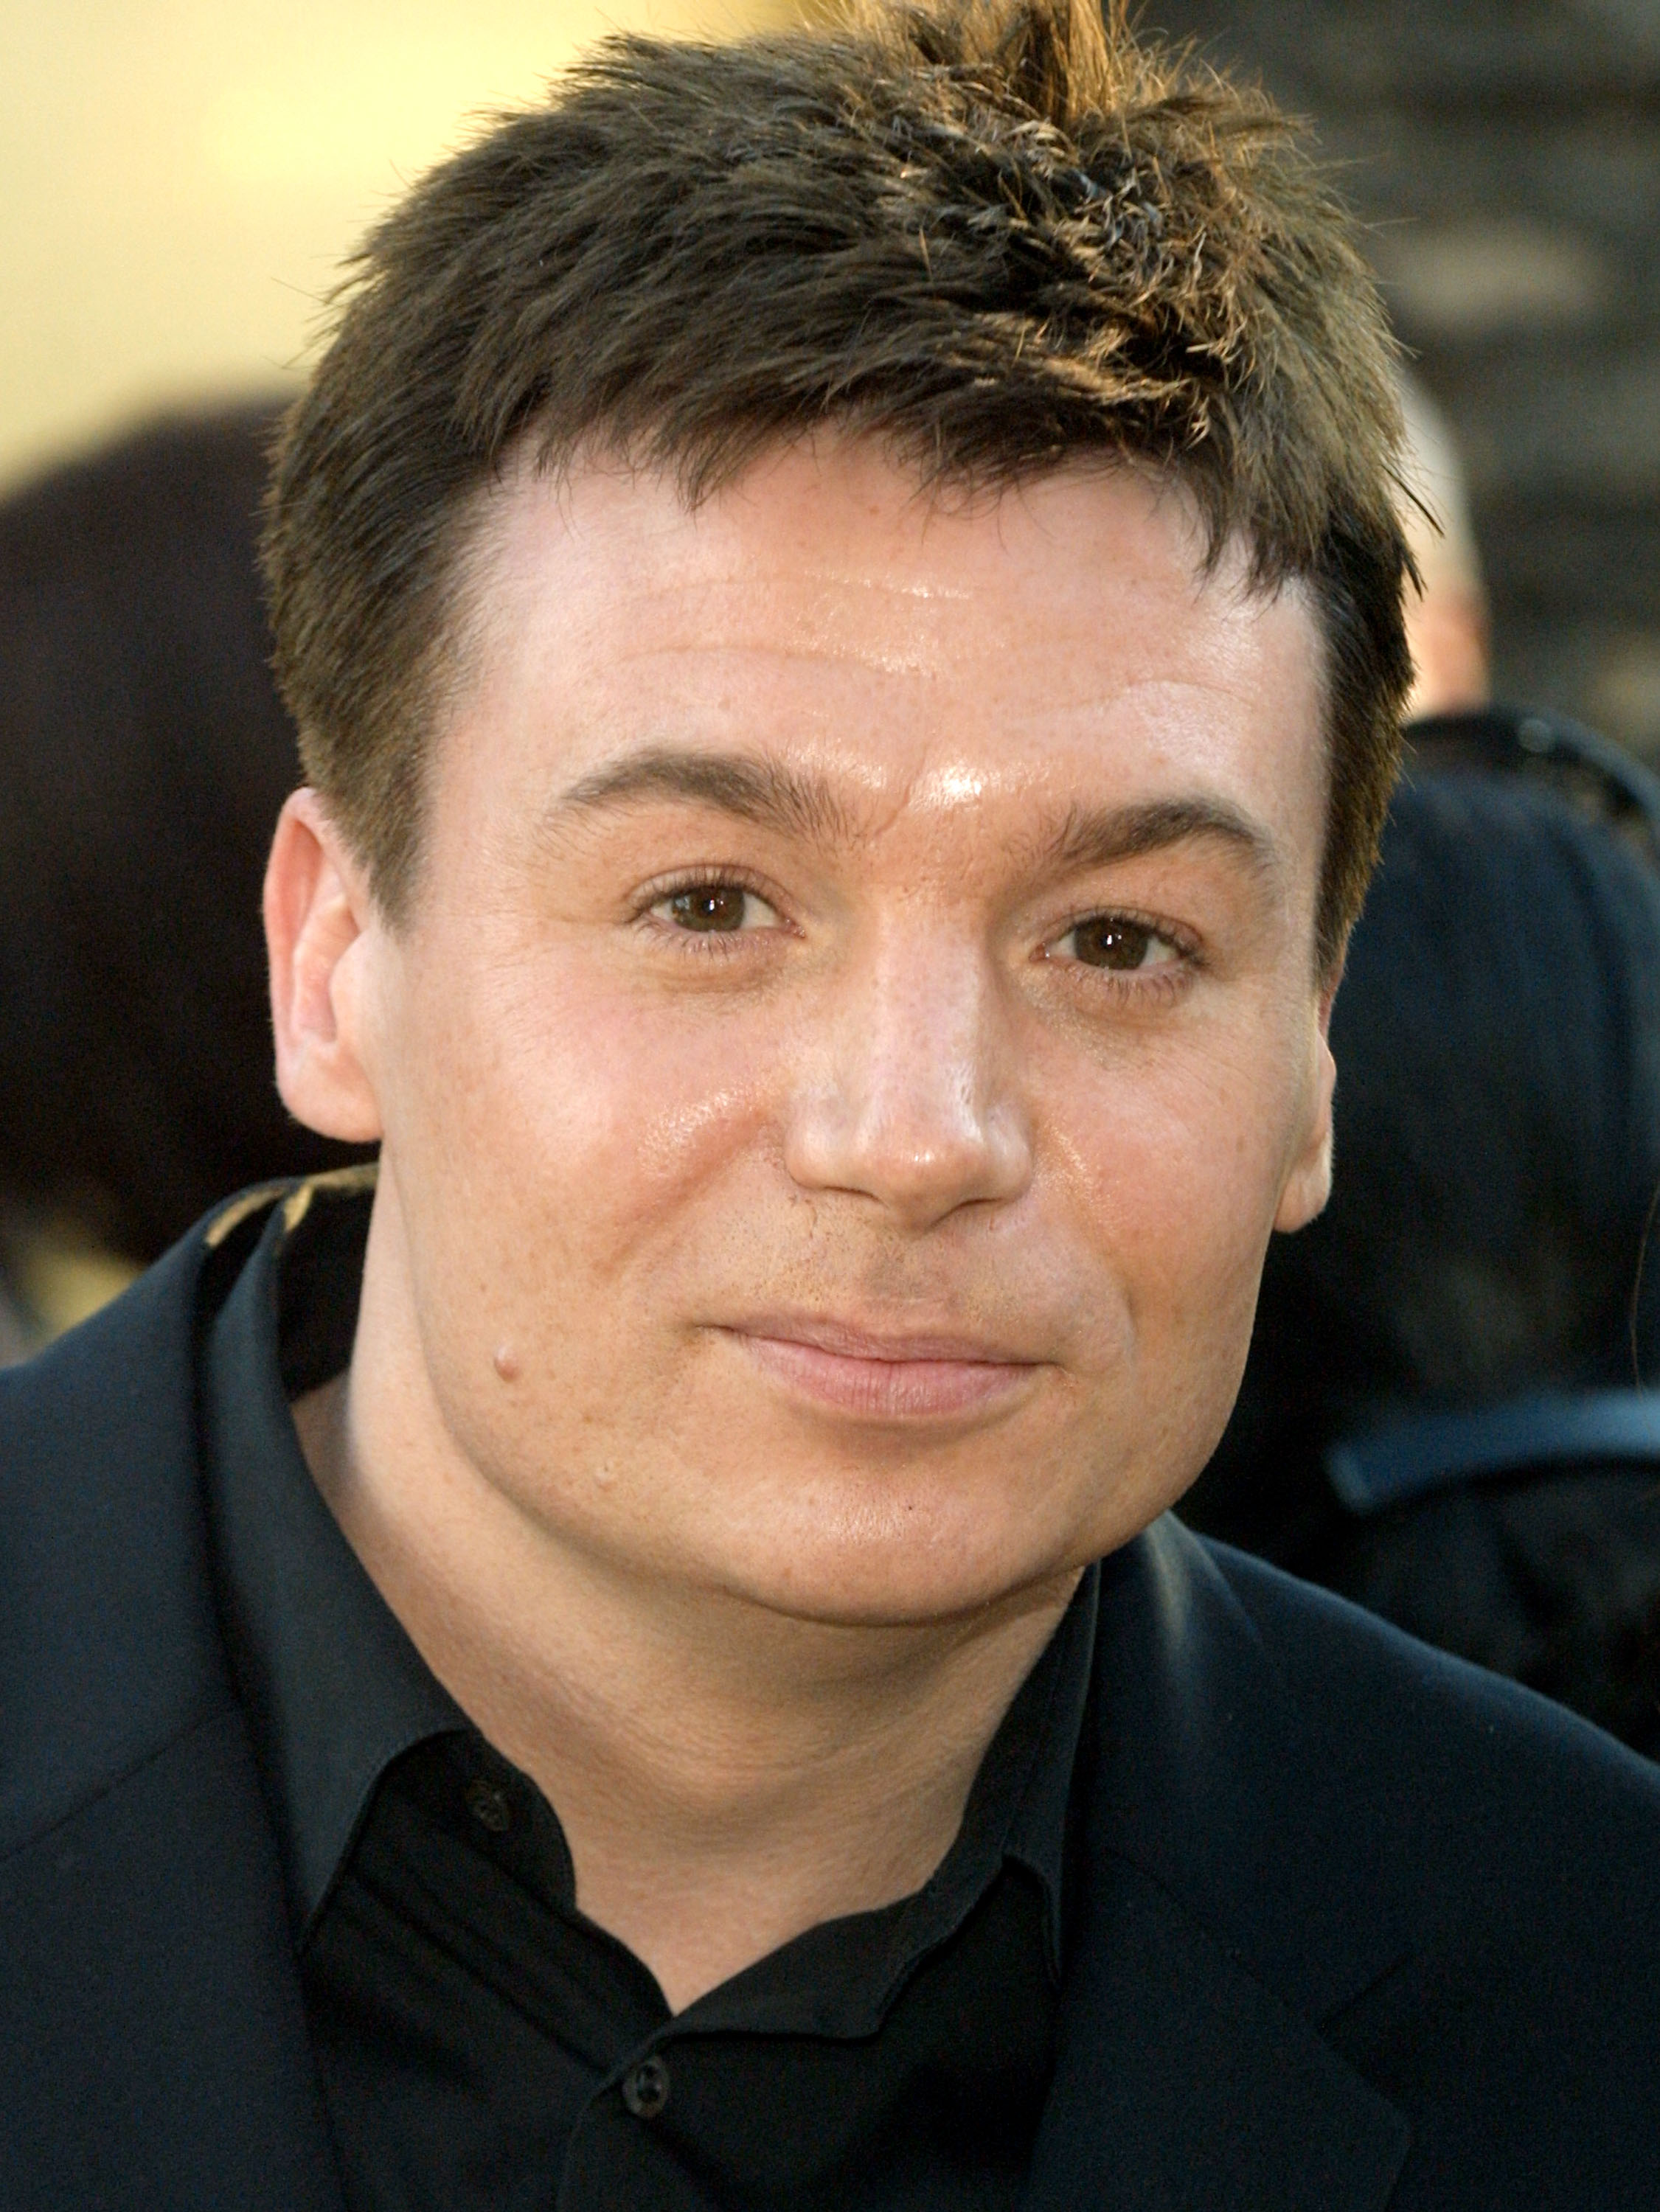 Mike Myers attends the film premiere of Austin Powers in Goldmember on July 22 in Los Angeles, California | Source: Getty Images